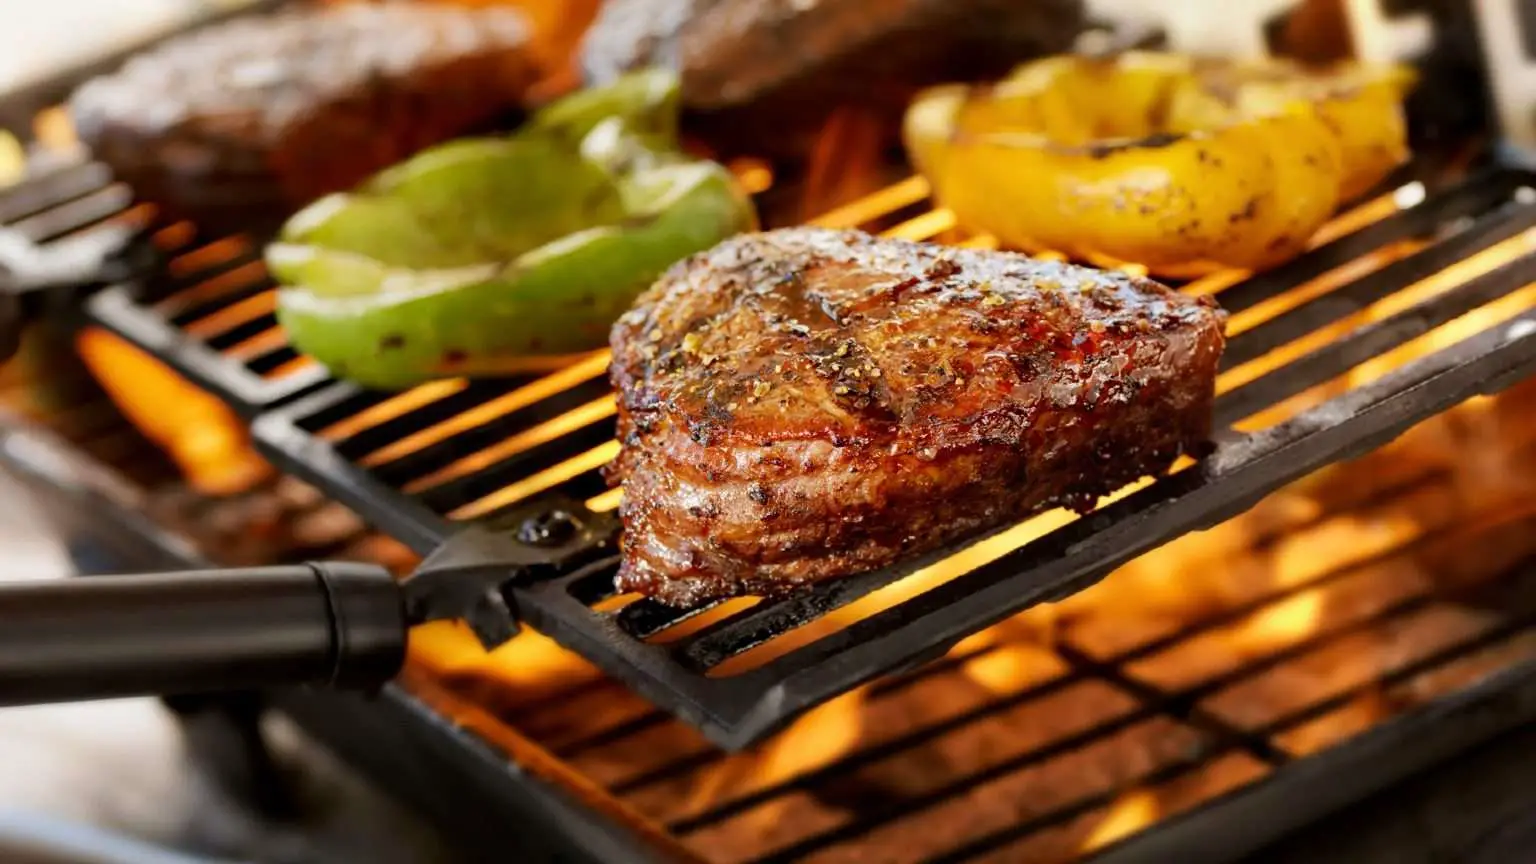 Where to buy a hibachi grill online in New Zealand ...